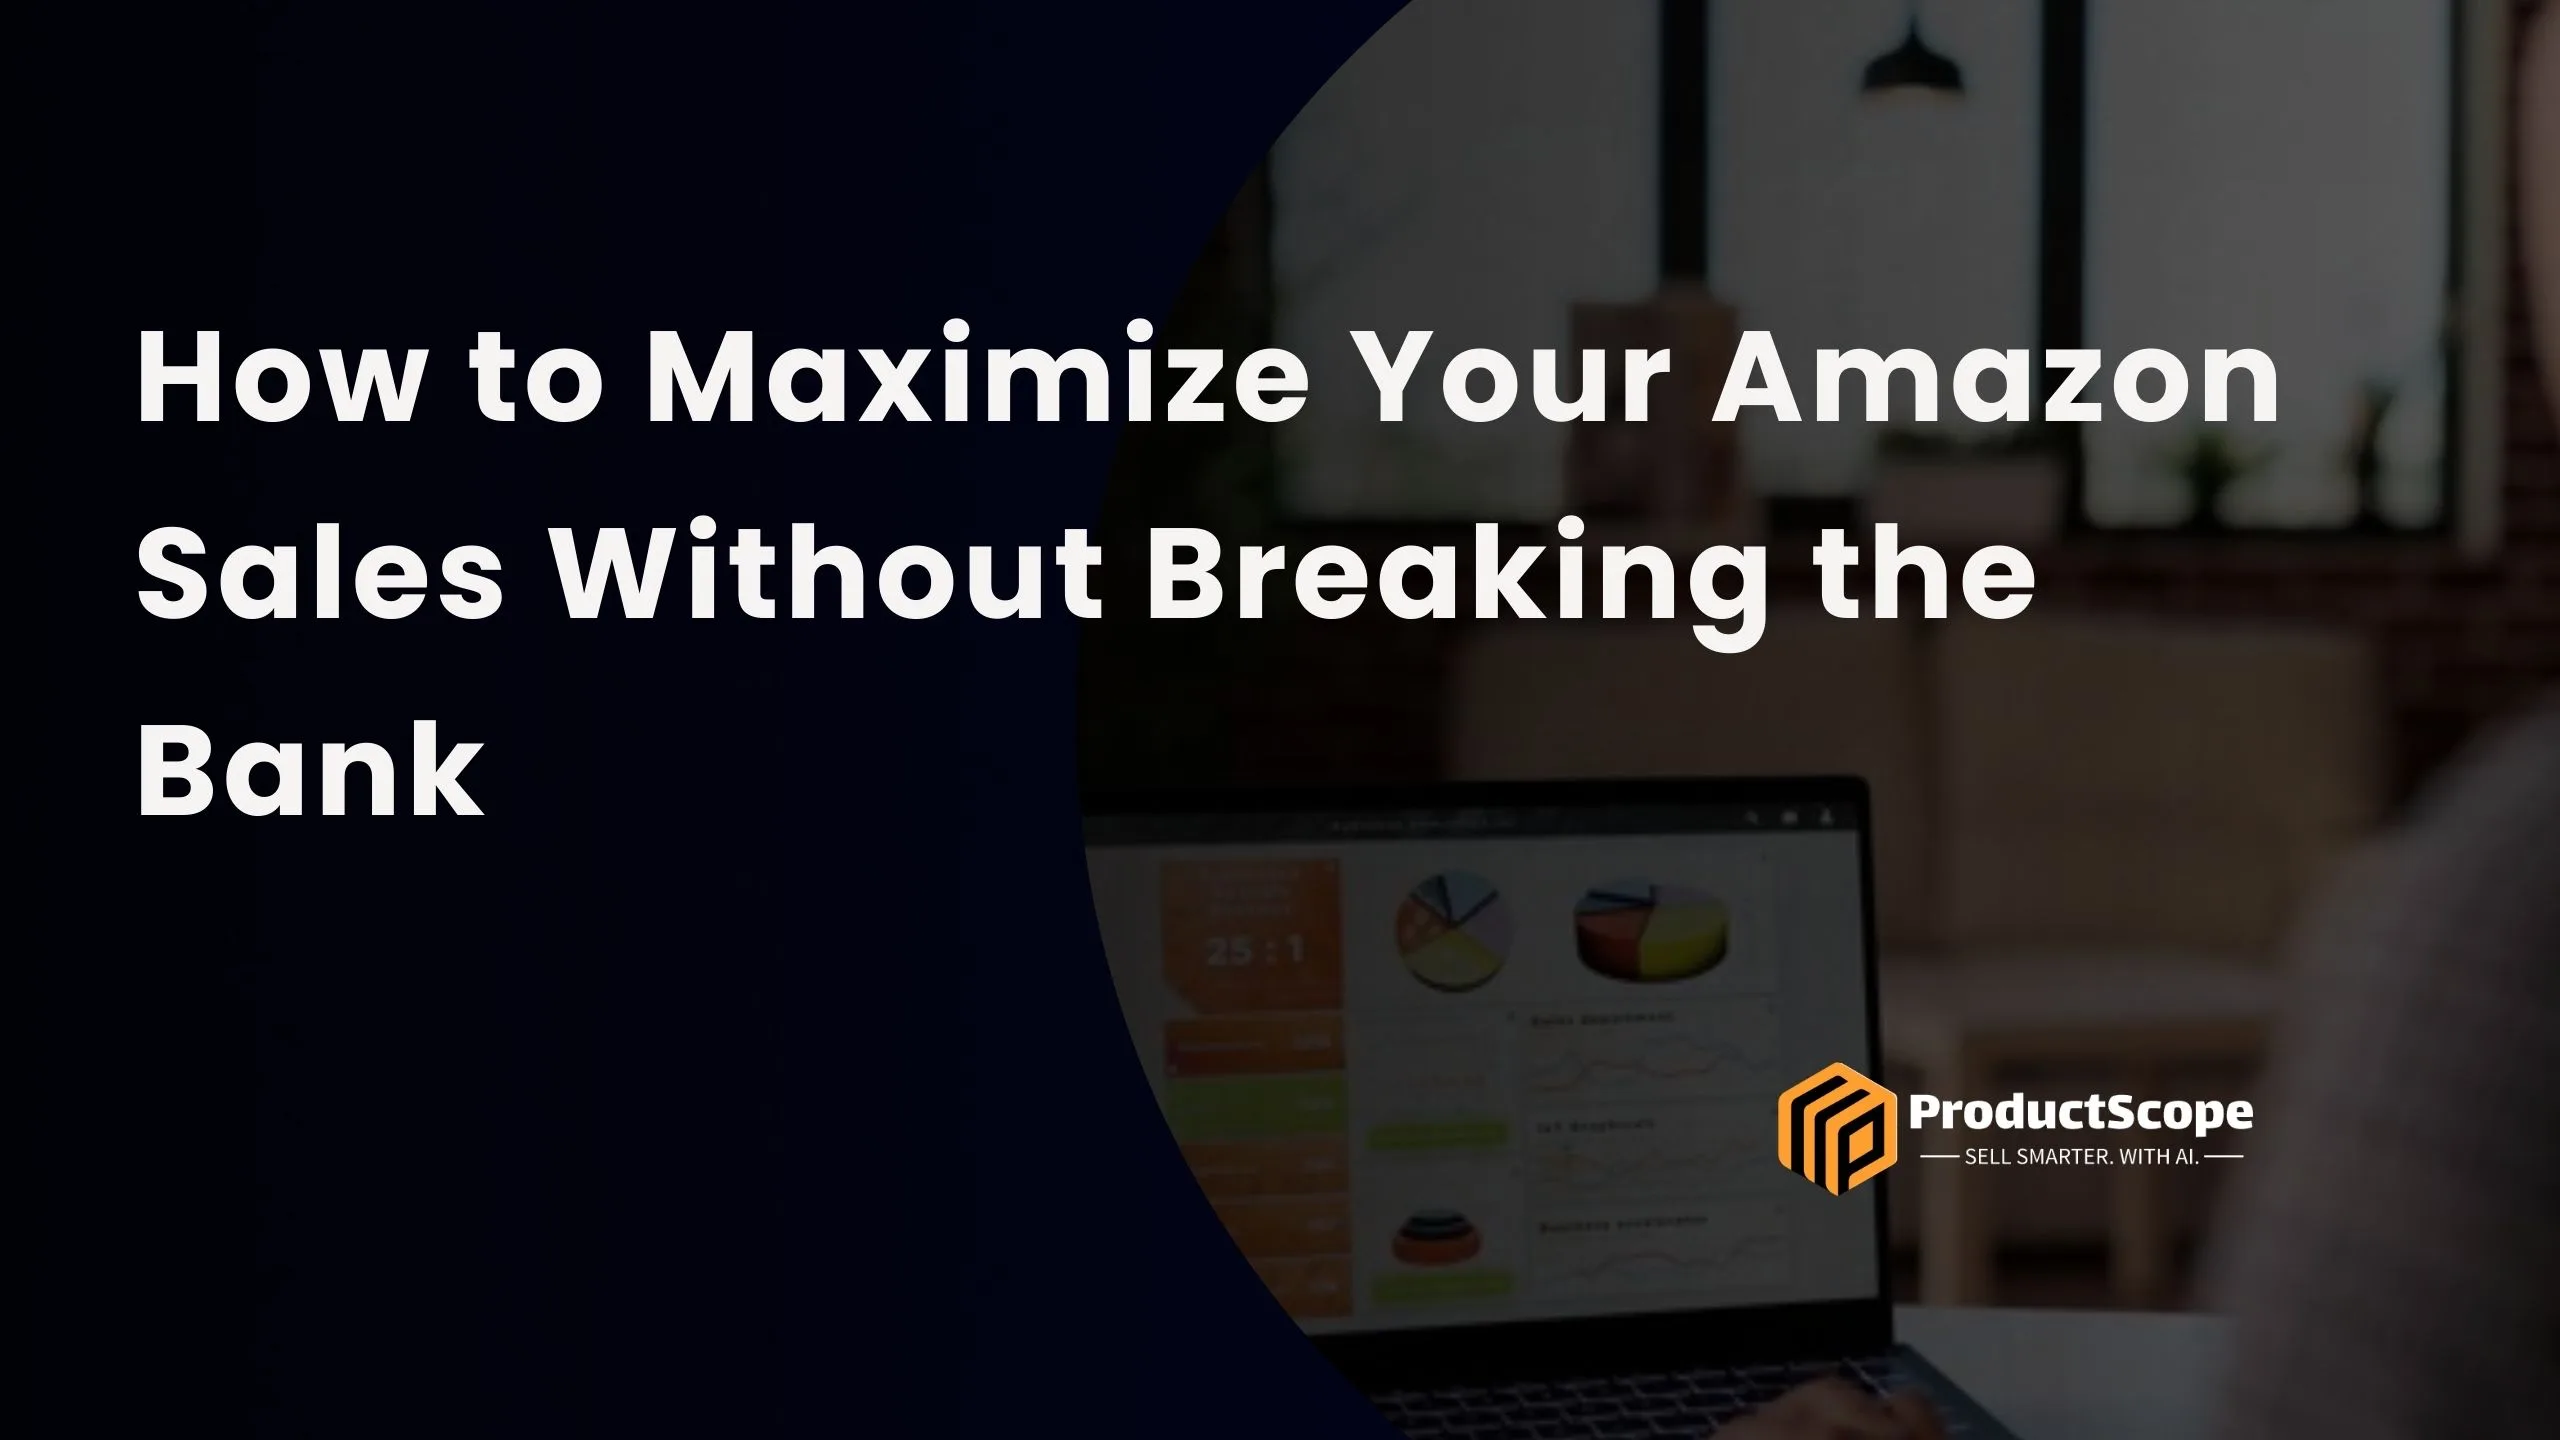 How to Maximize Your Amazon Sales Without Breaking the Bank